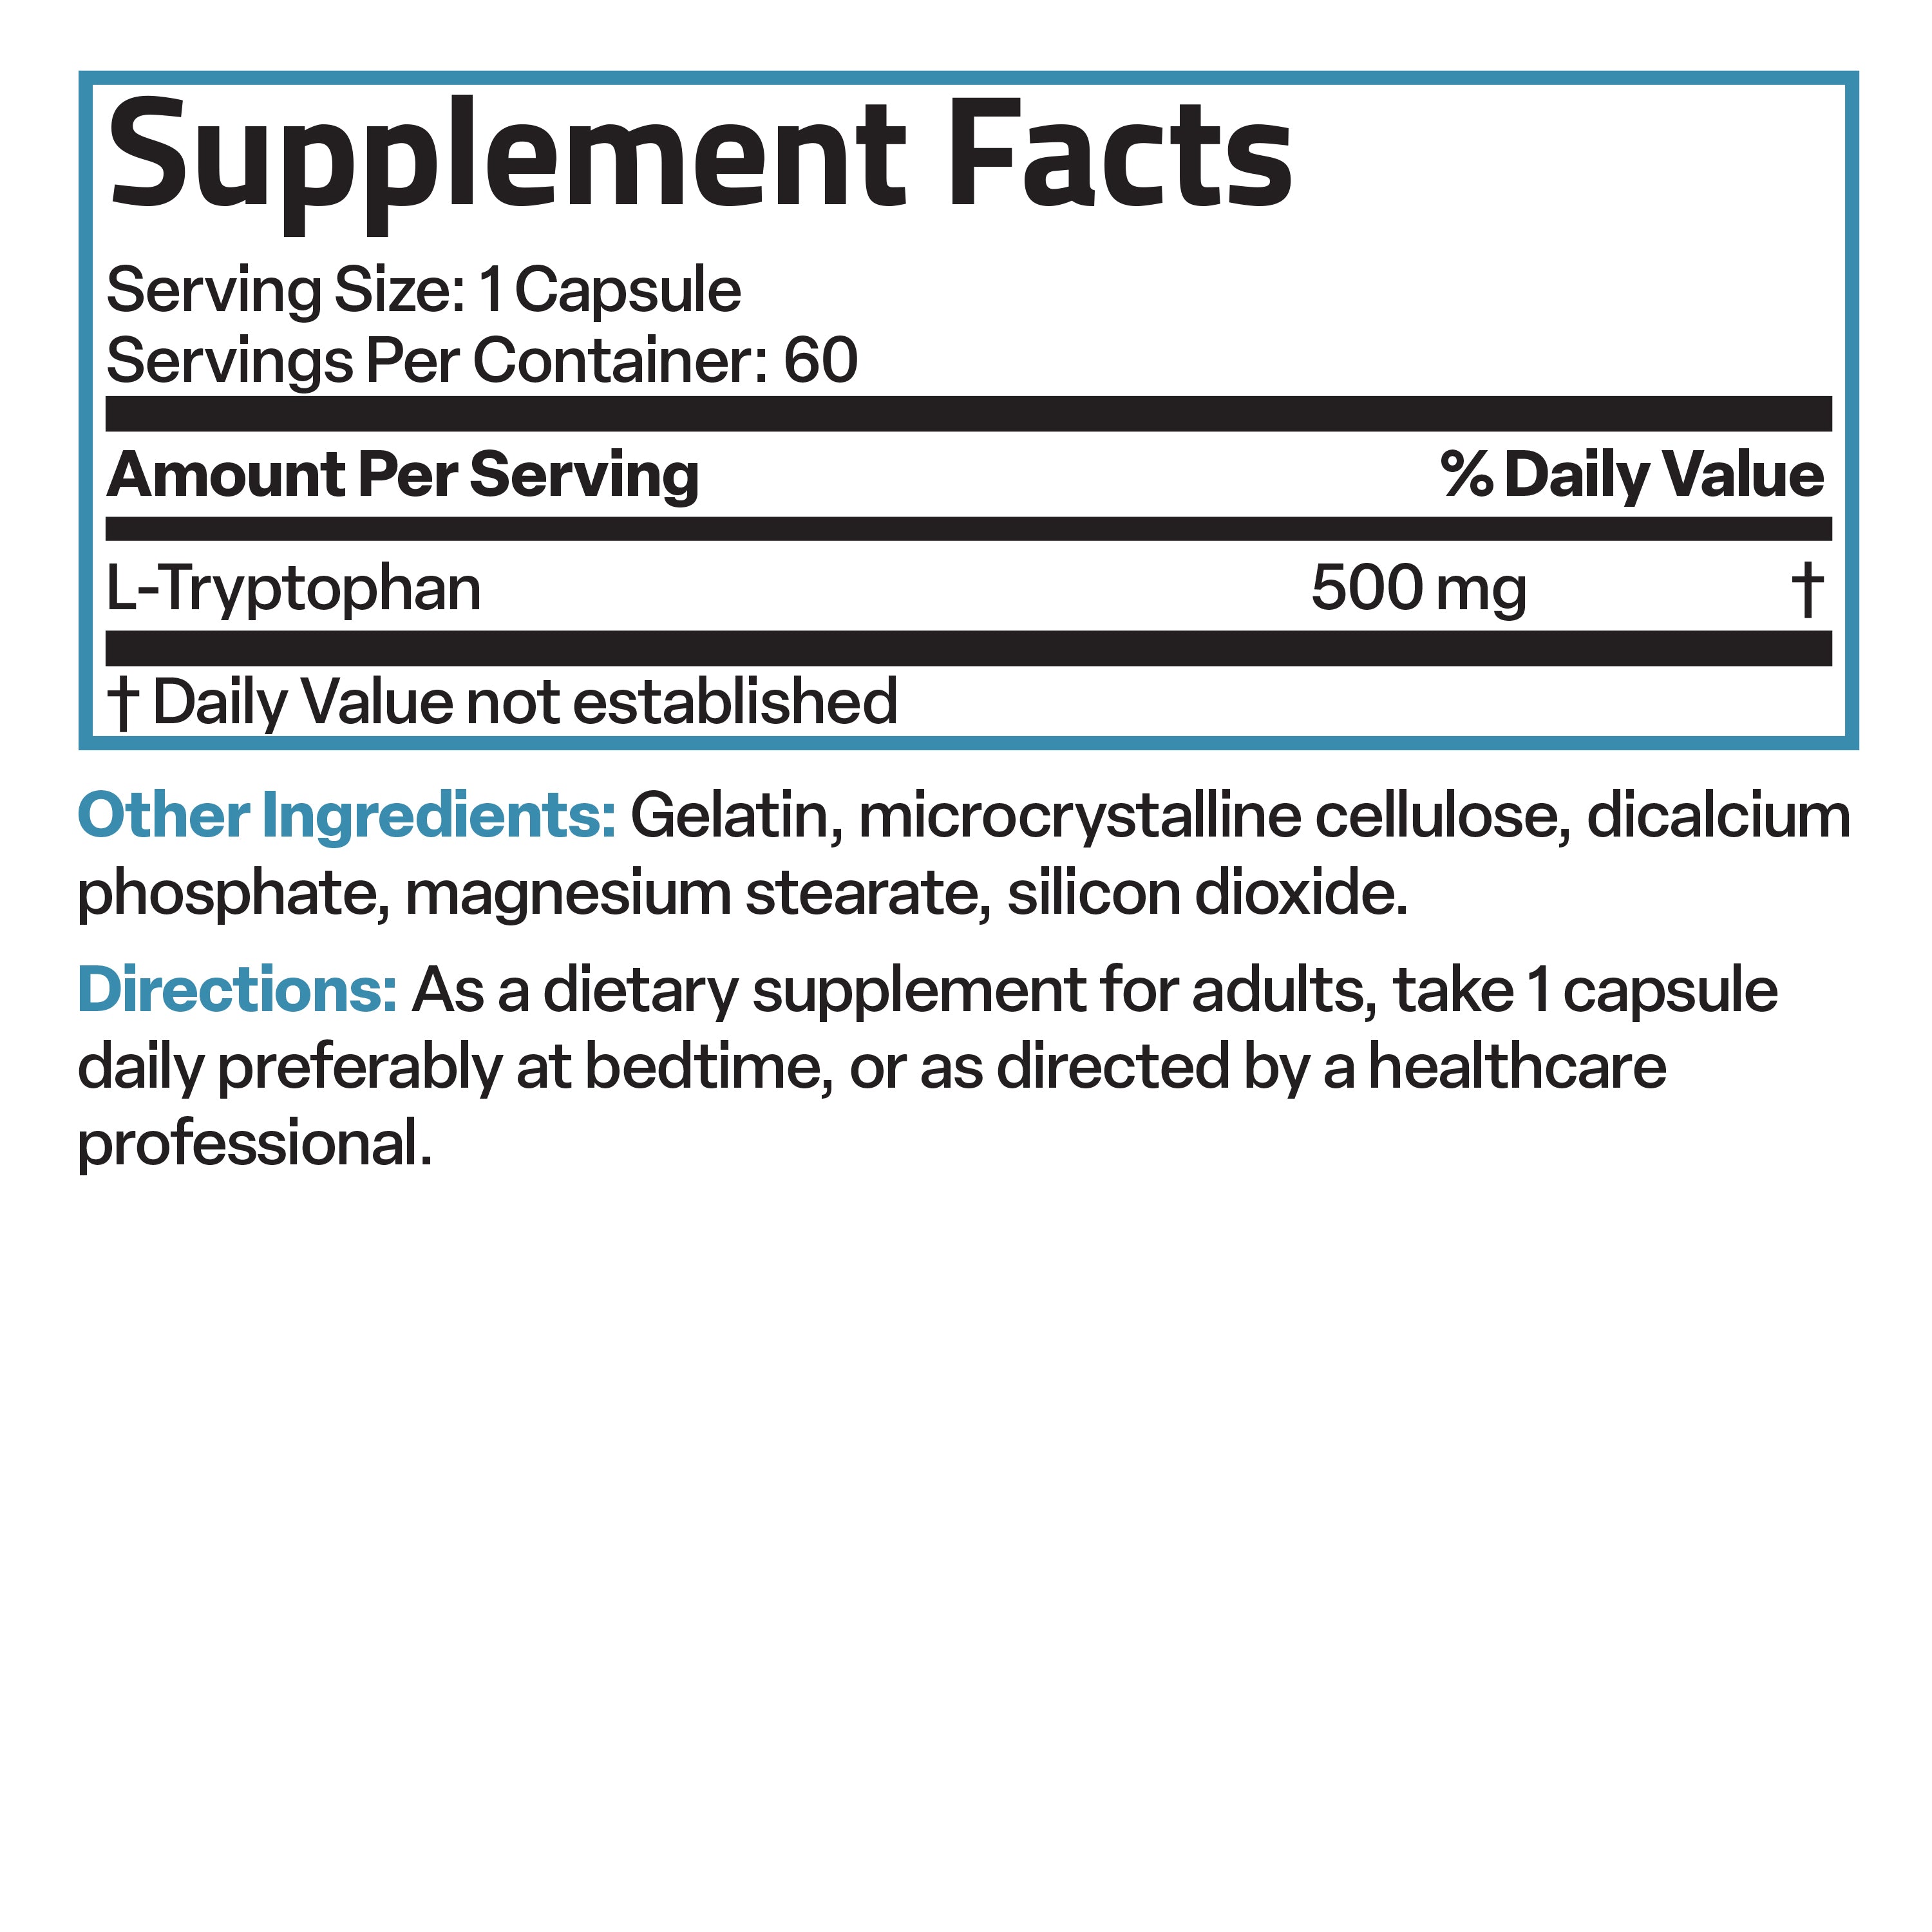 L-Tryptophan 500 MG view 4 of 8